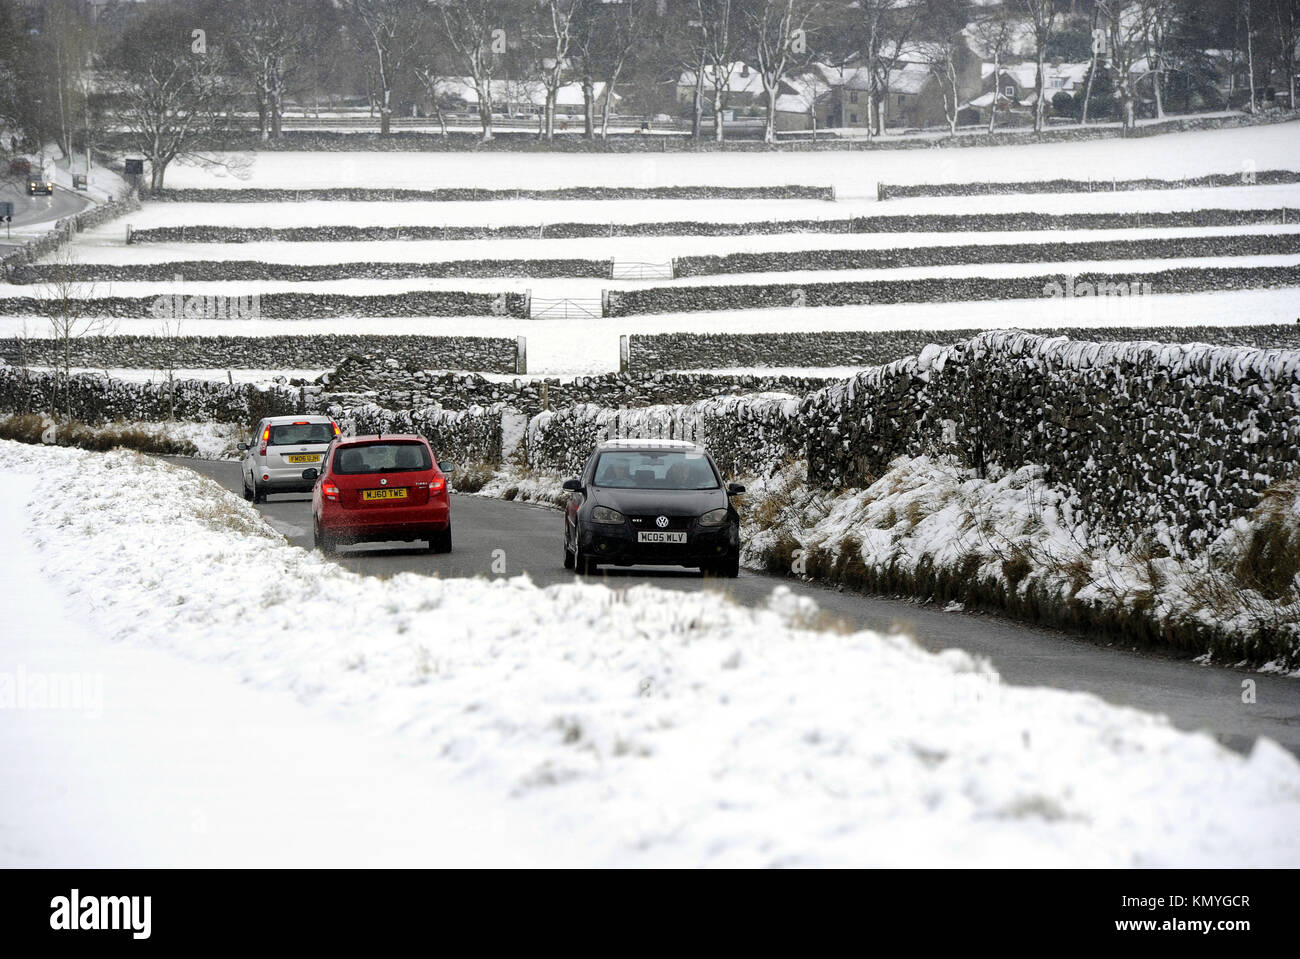 Snow covered fields in the Peak District, as widespread disruption is expected as snow continues to fall across large parts of the UK, with forecasters warning some communities could be cut off as temperatures plummet. Stock Photo